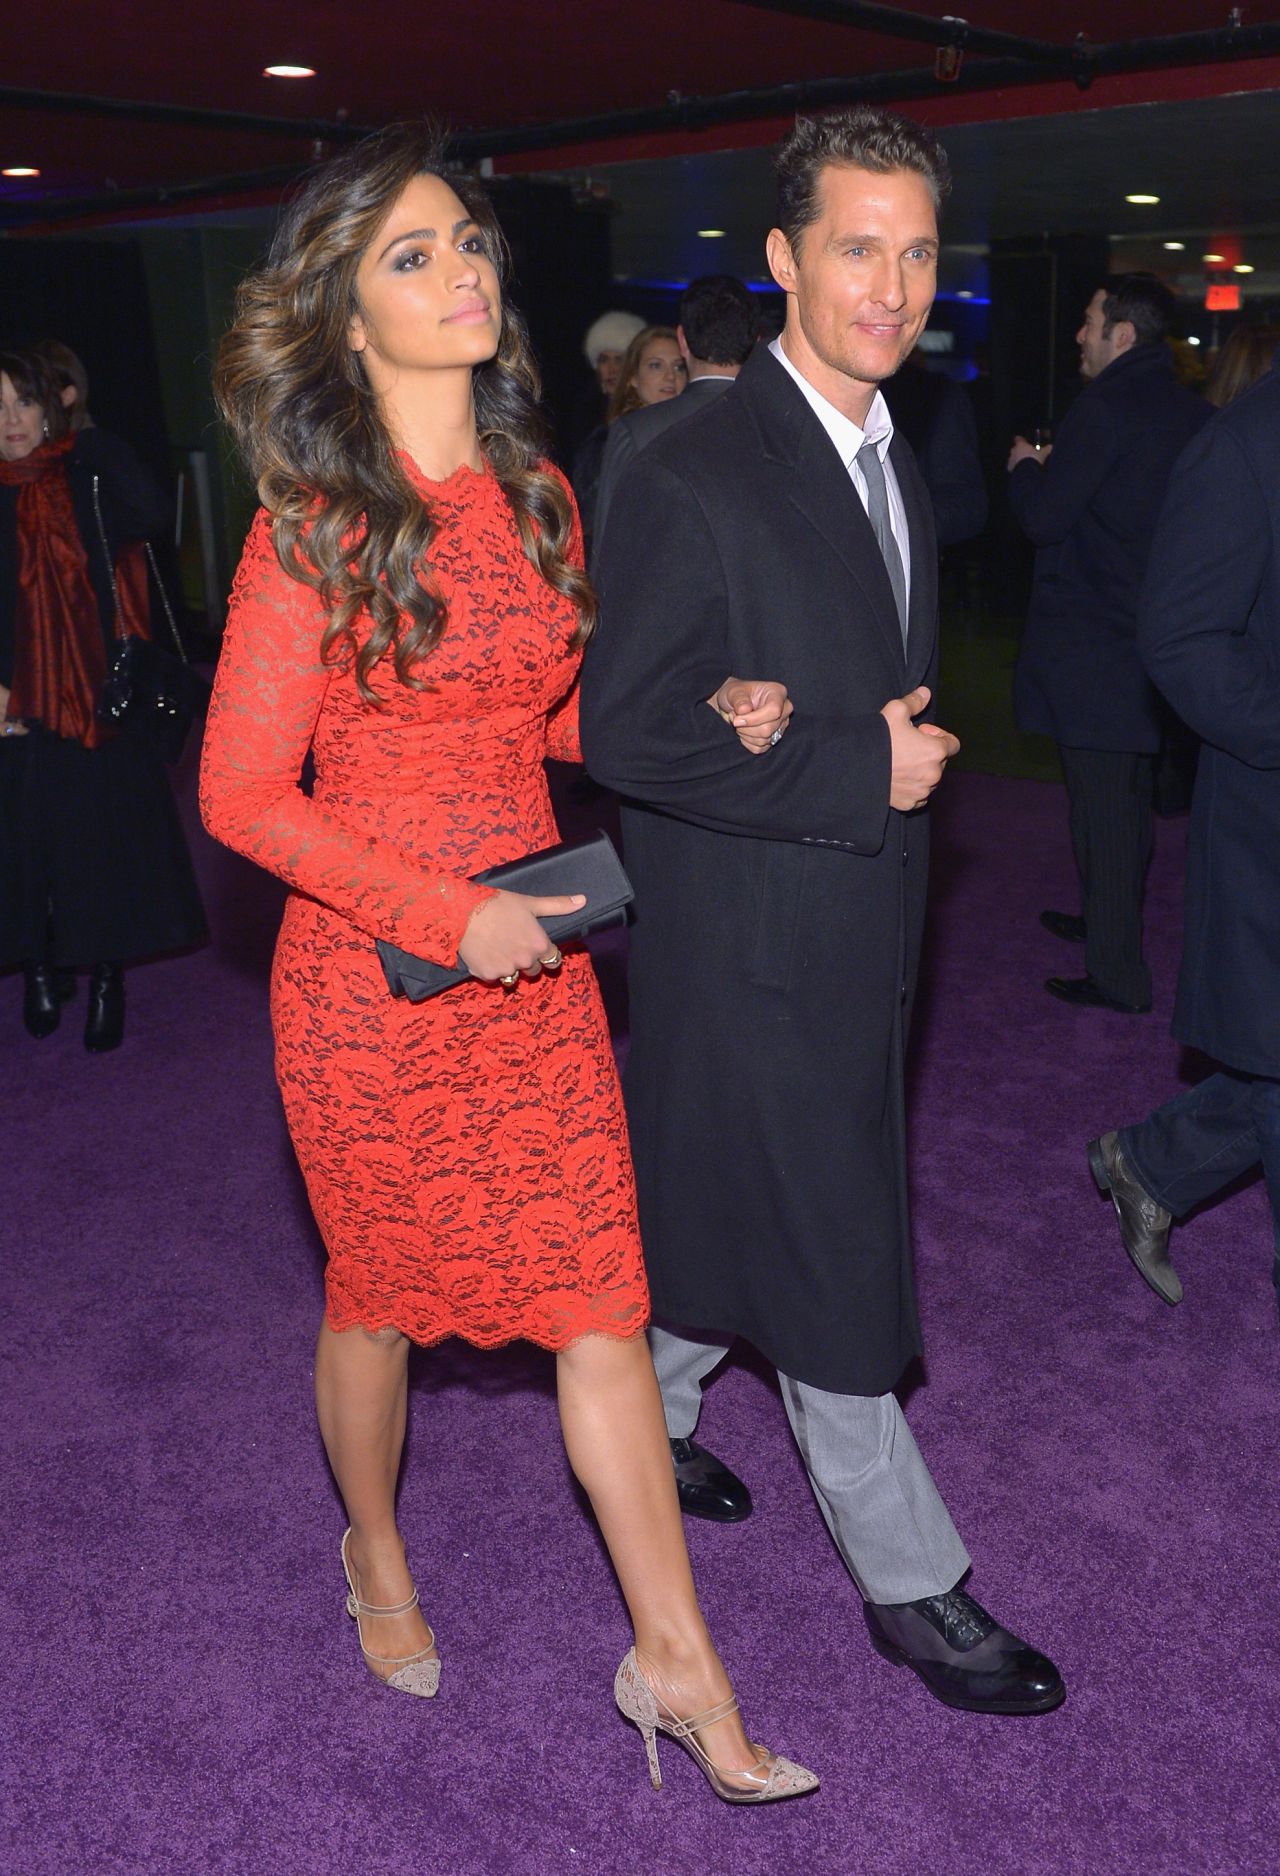 Matthew McConaughey and Camila Alves arrive at the "Wolf of Wall Street" premiere on December 17. 